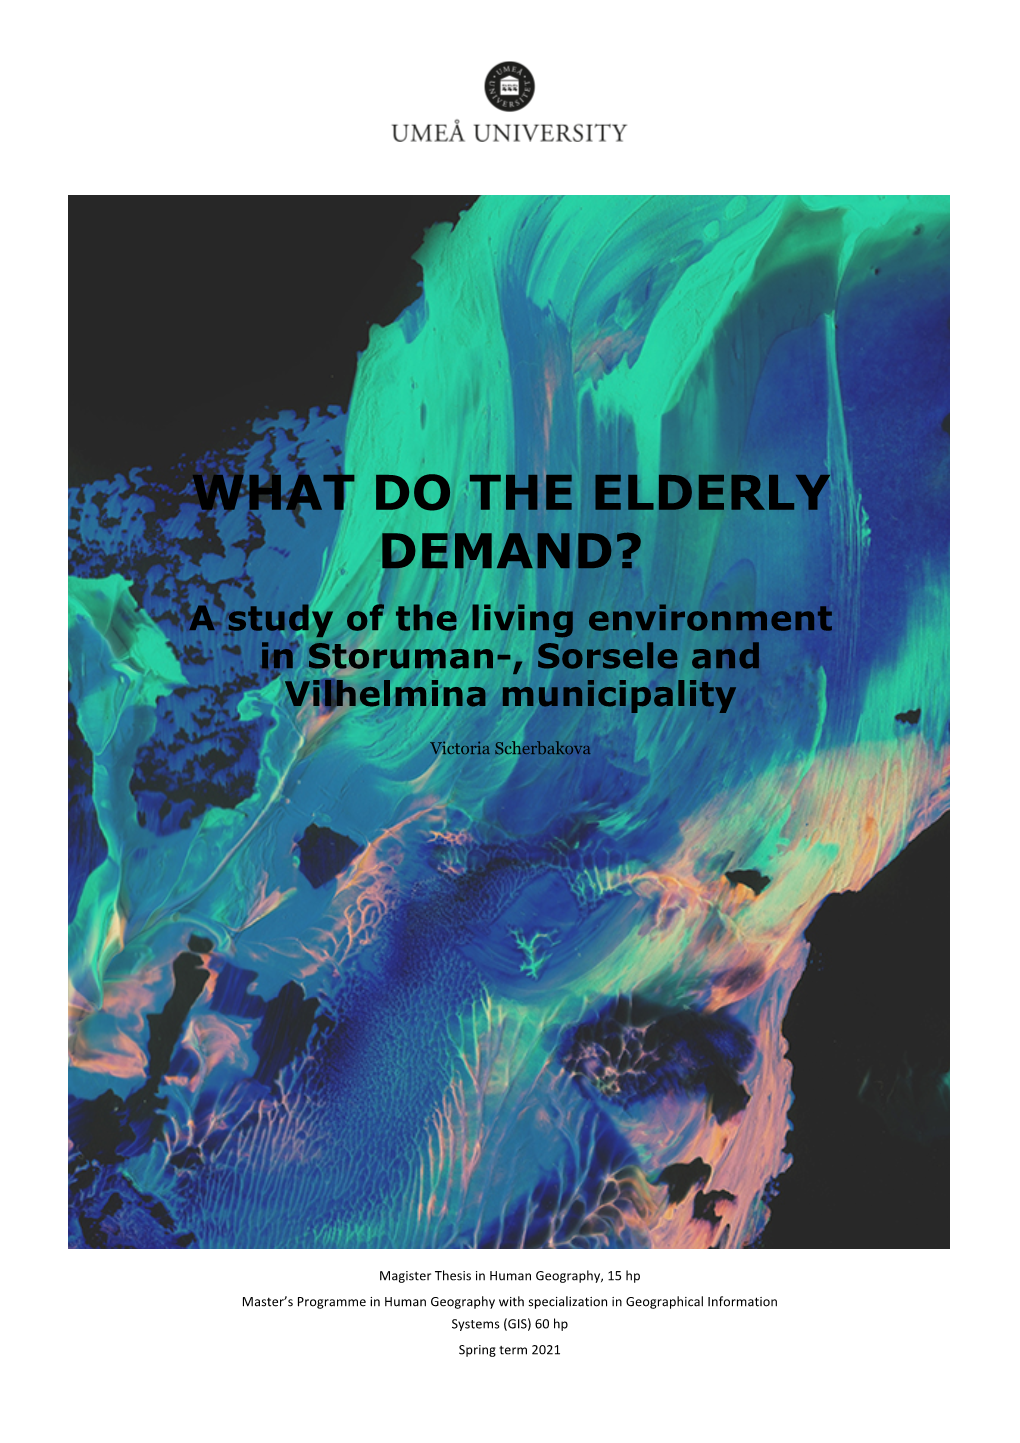 WHAT DO the ELDERLY DEMAND? a Study of the Living Environment in Storuman-, Sorsele and Vilhelmina Municipality